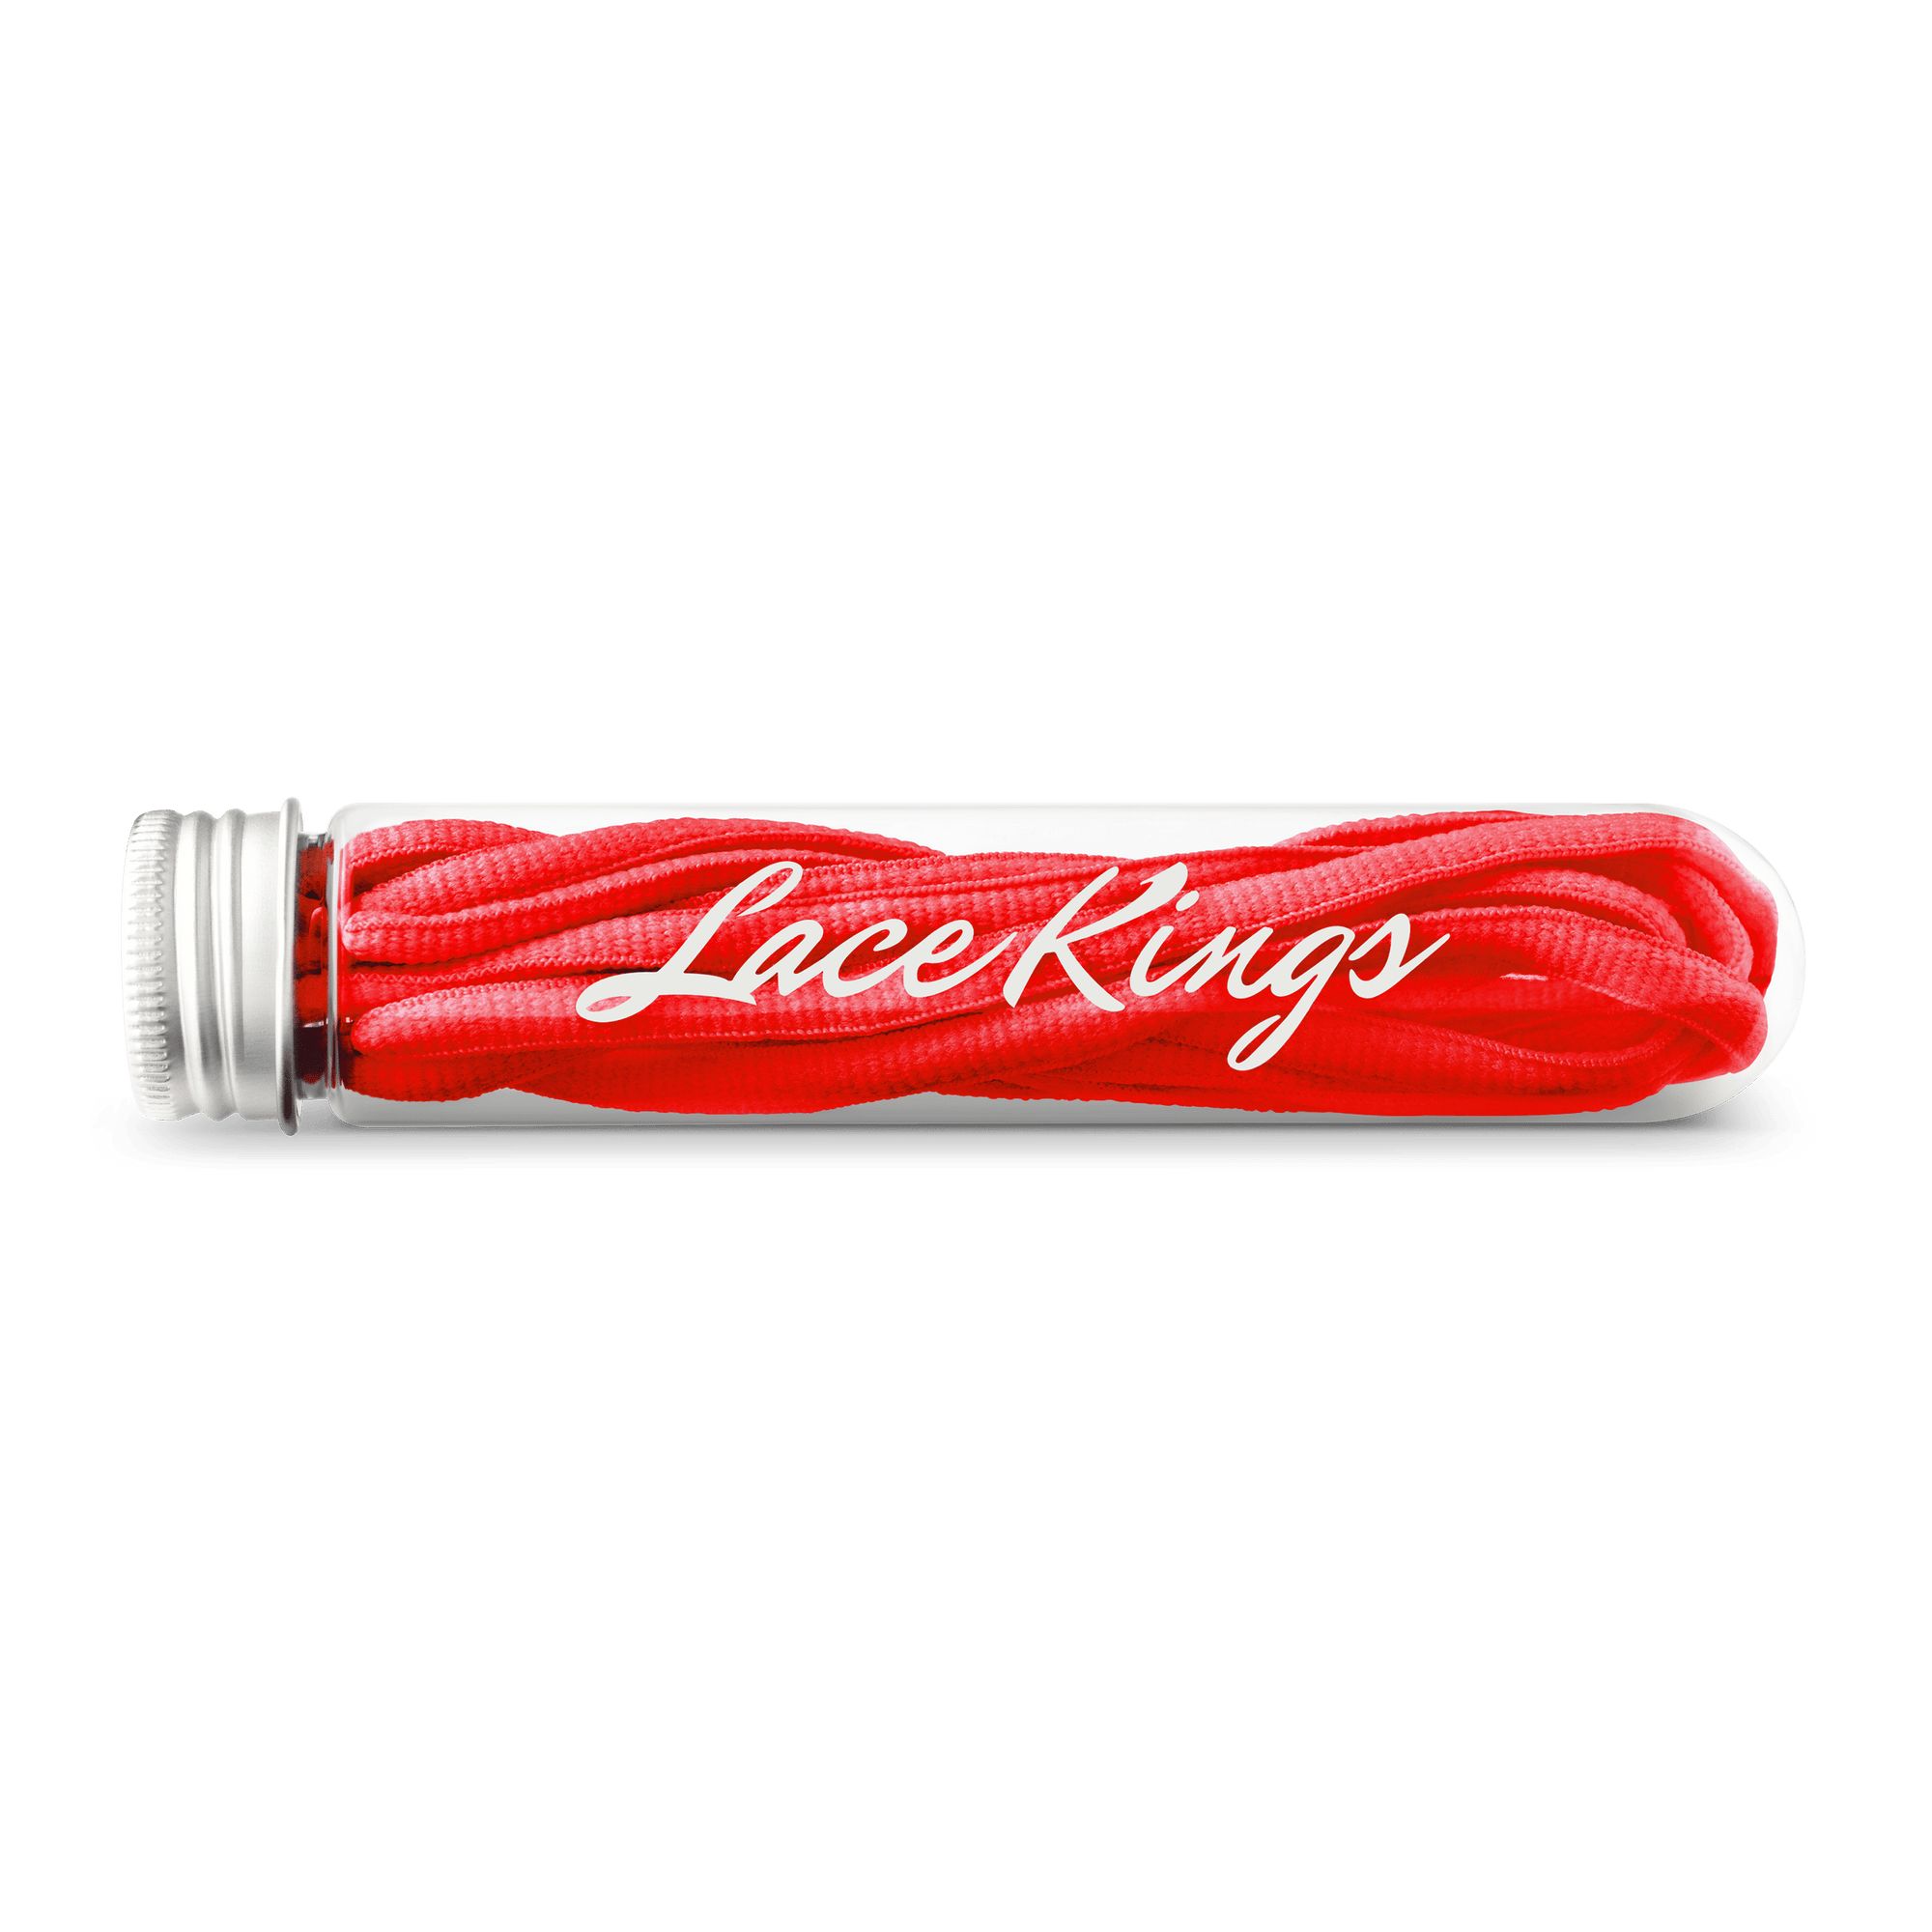 Oval Shoe Laces (Red)